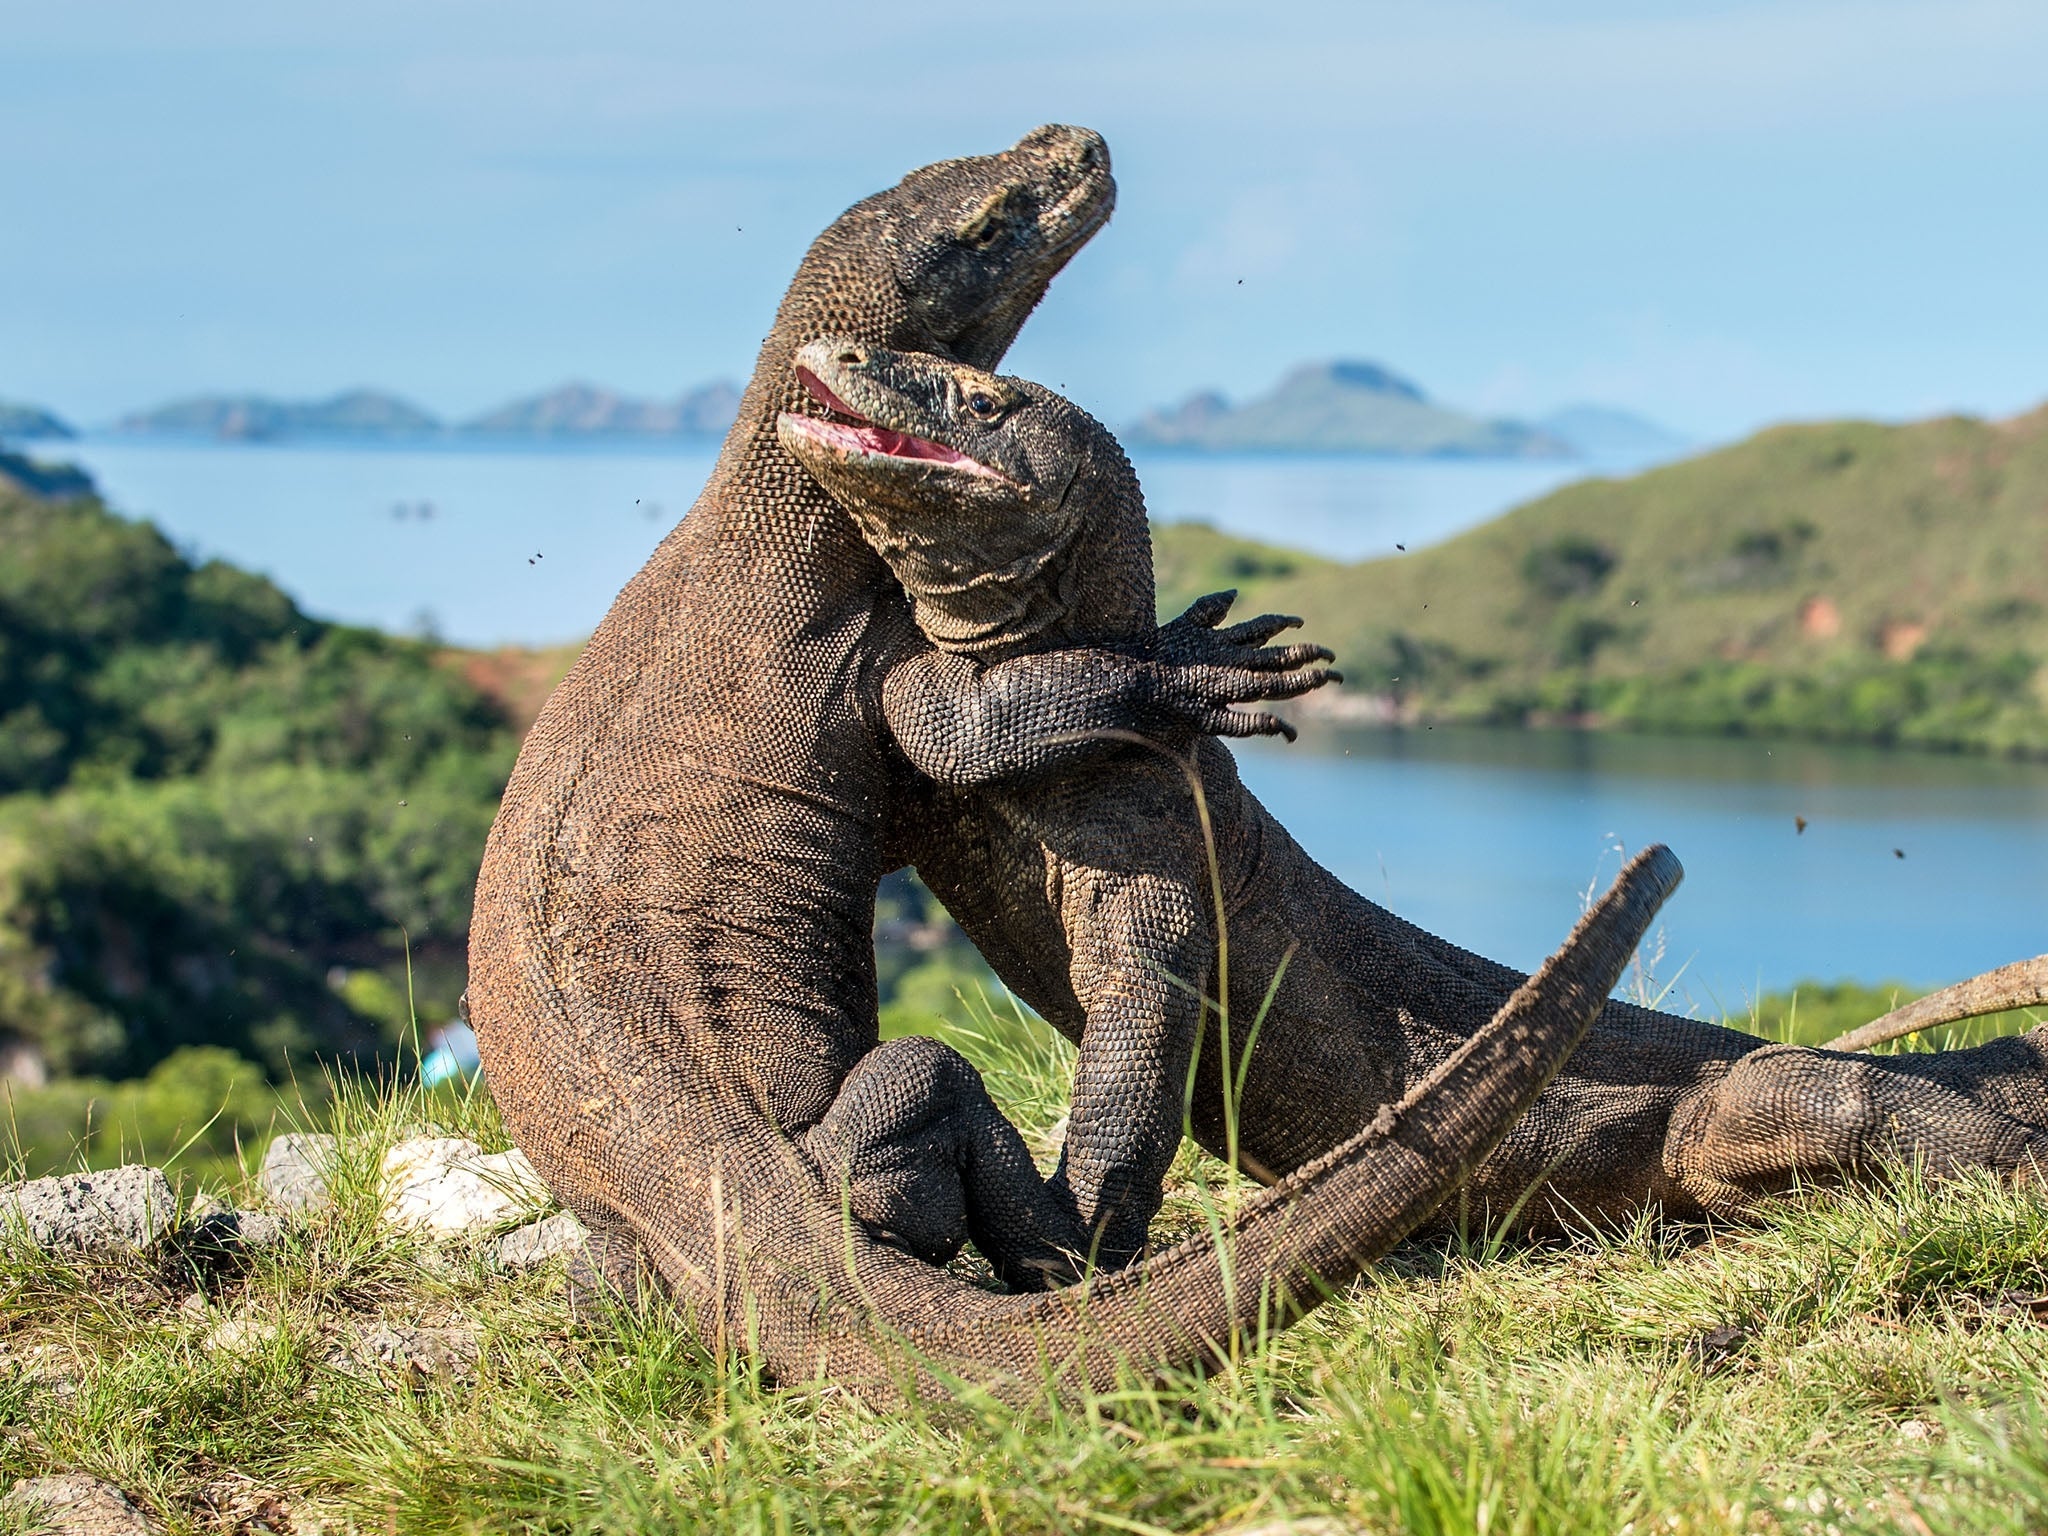 Komodo dragon island to remain open but entry price soars to 1,000